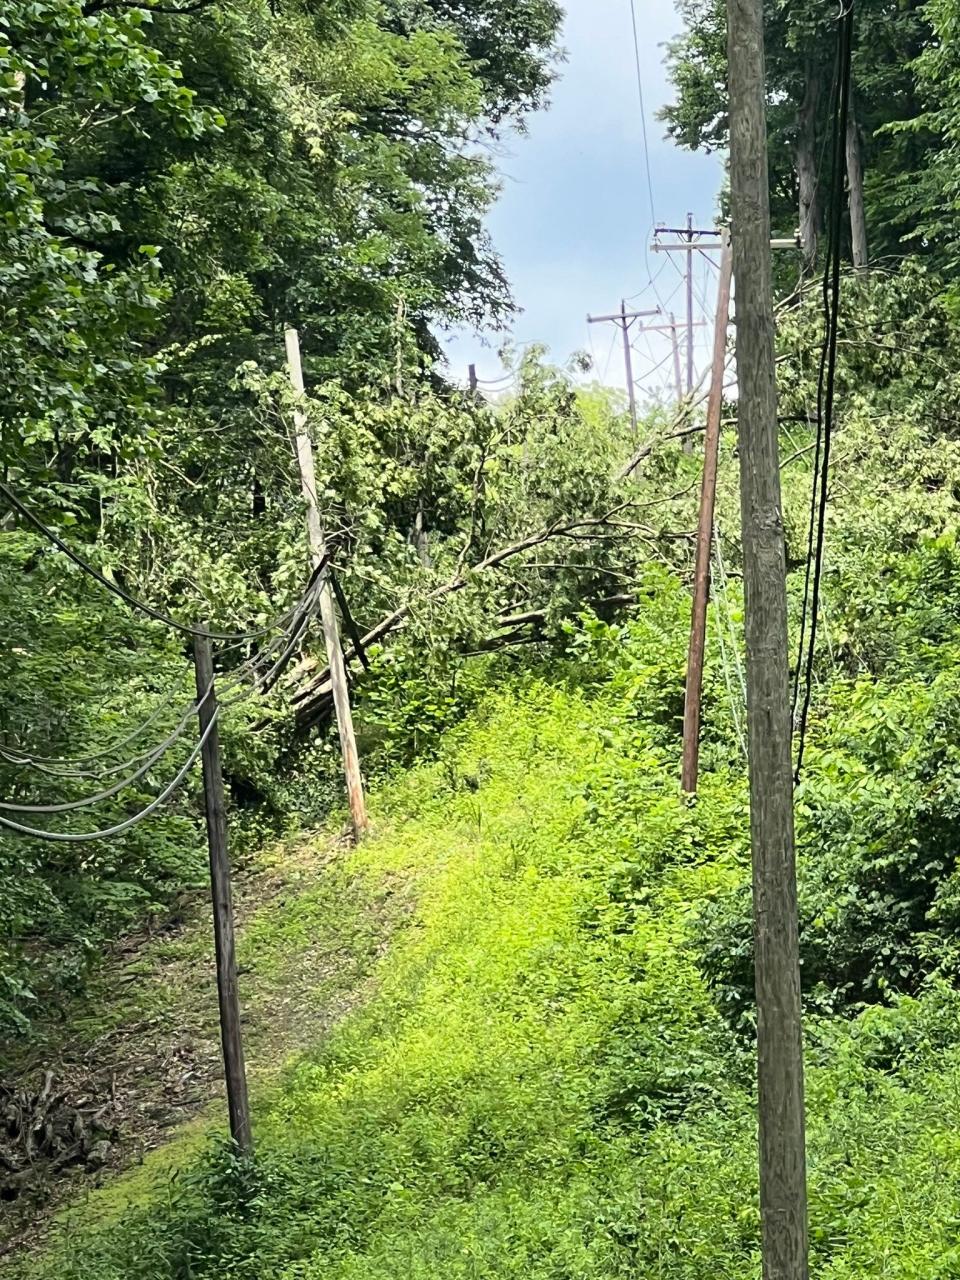 Fallen trees in Monroe County have damaged power lines and interrupted service, Duke Energy said.